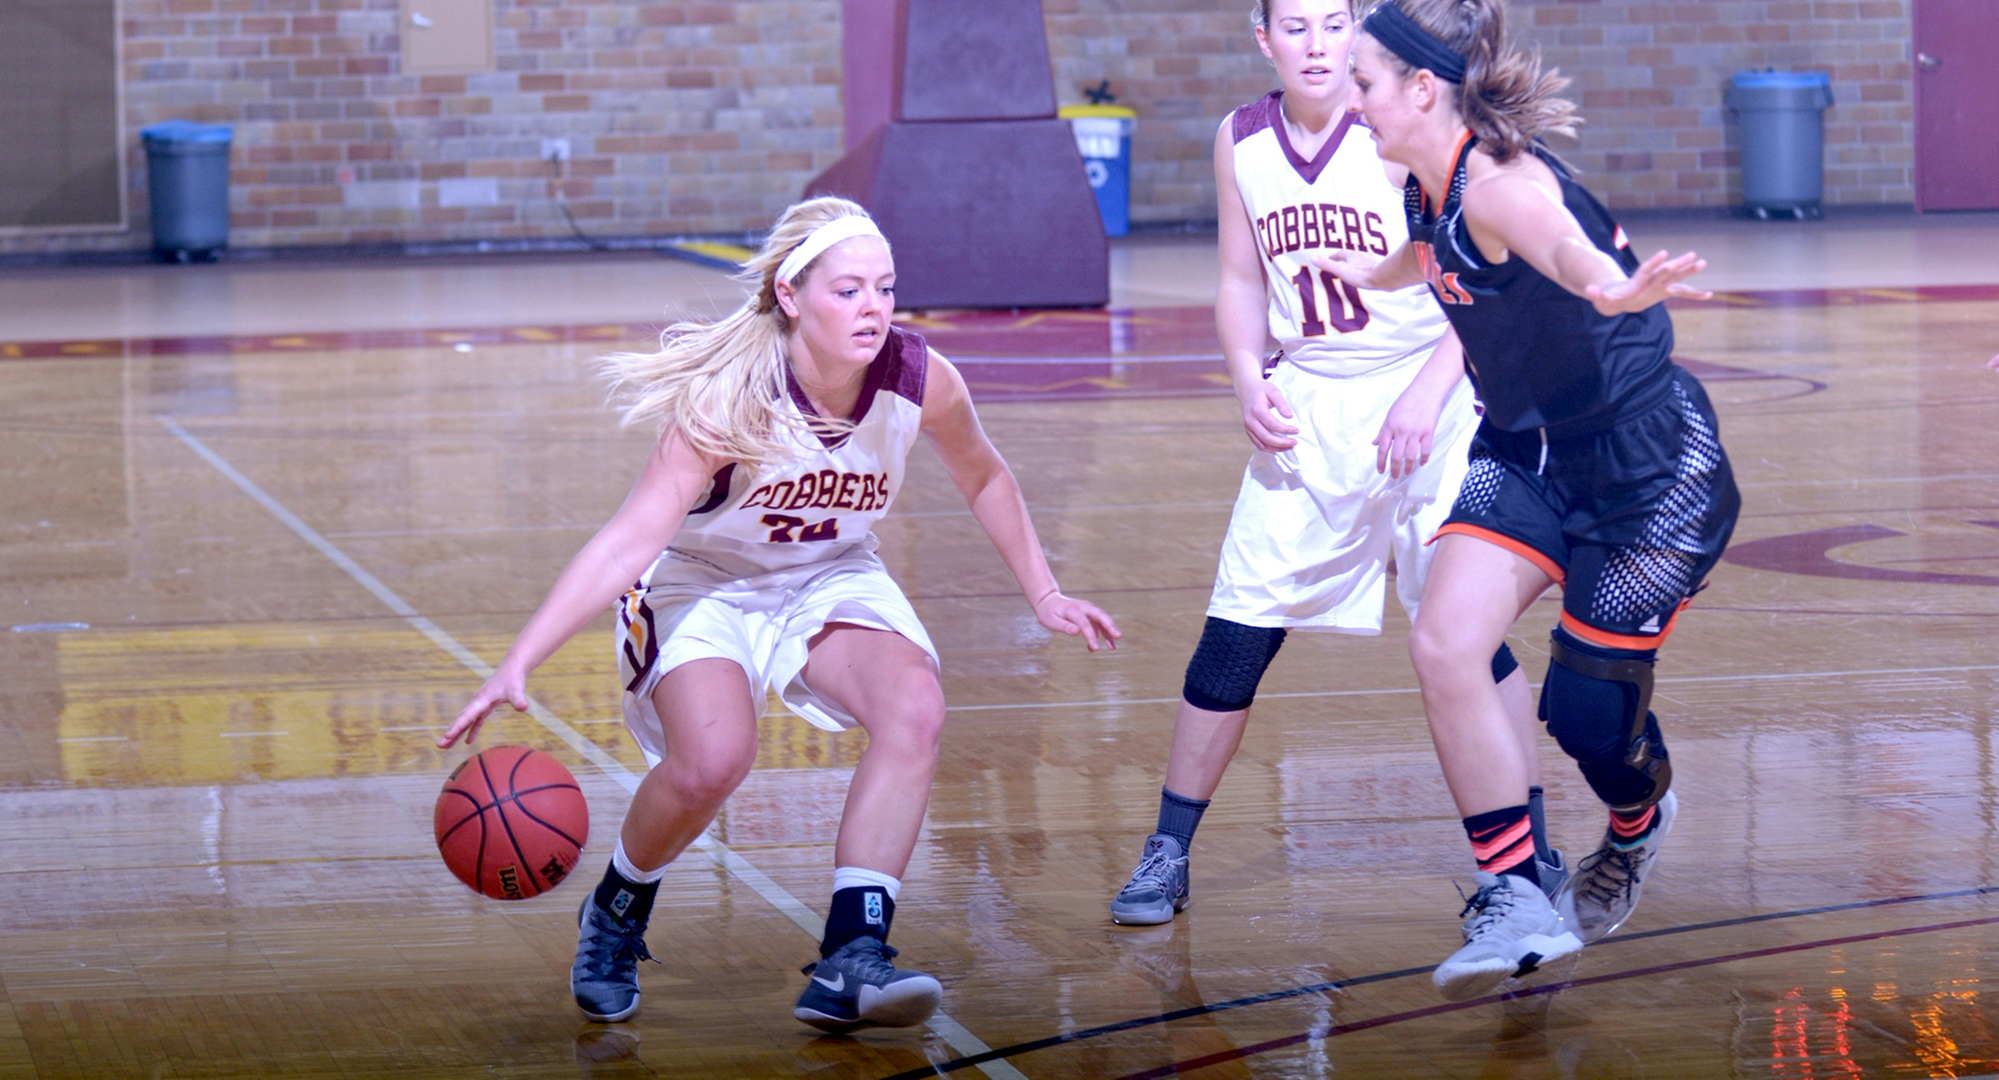 Sophomore Grace Wolhowe had a team-high 12 points in the Cobbers' final non-conference game of the year at Valley City State.